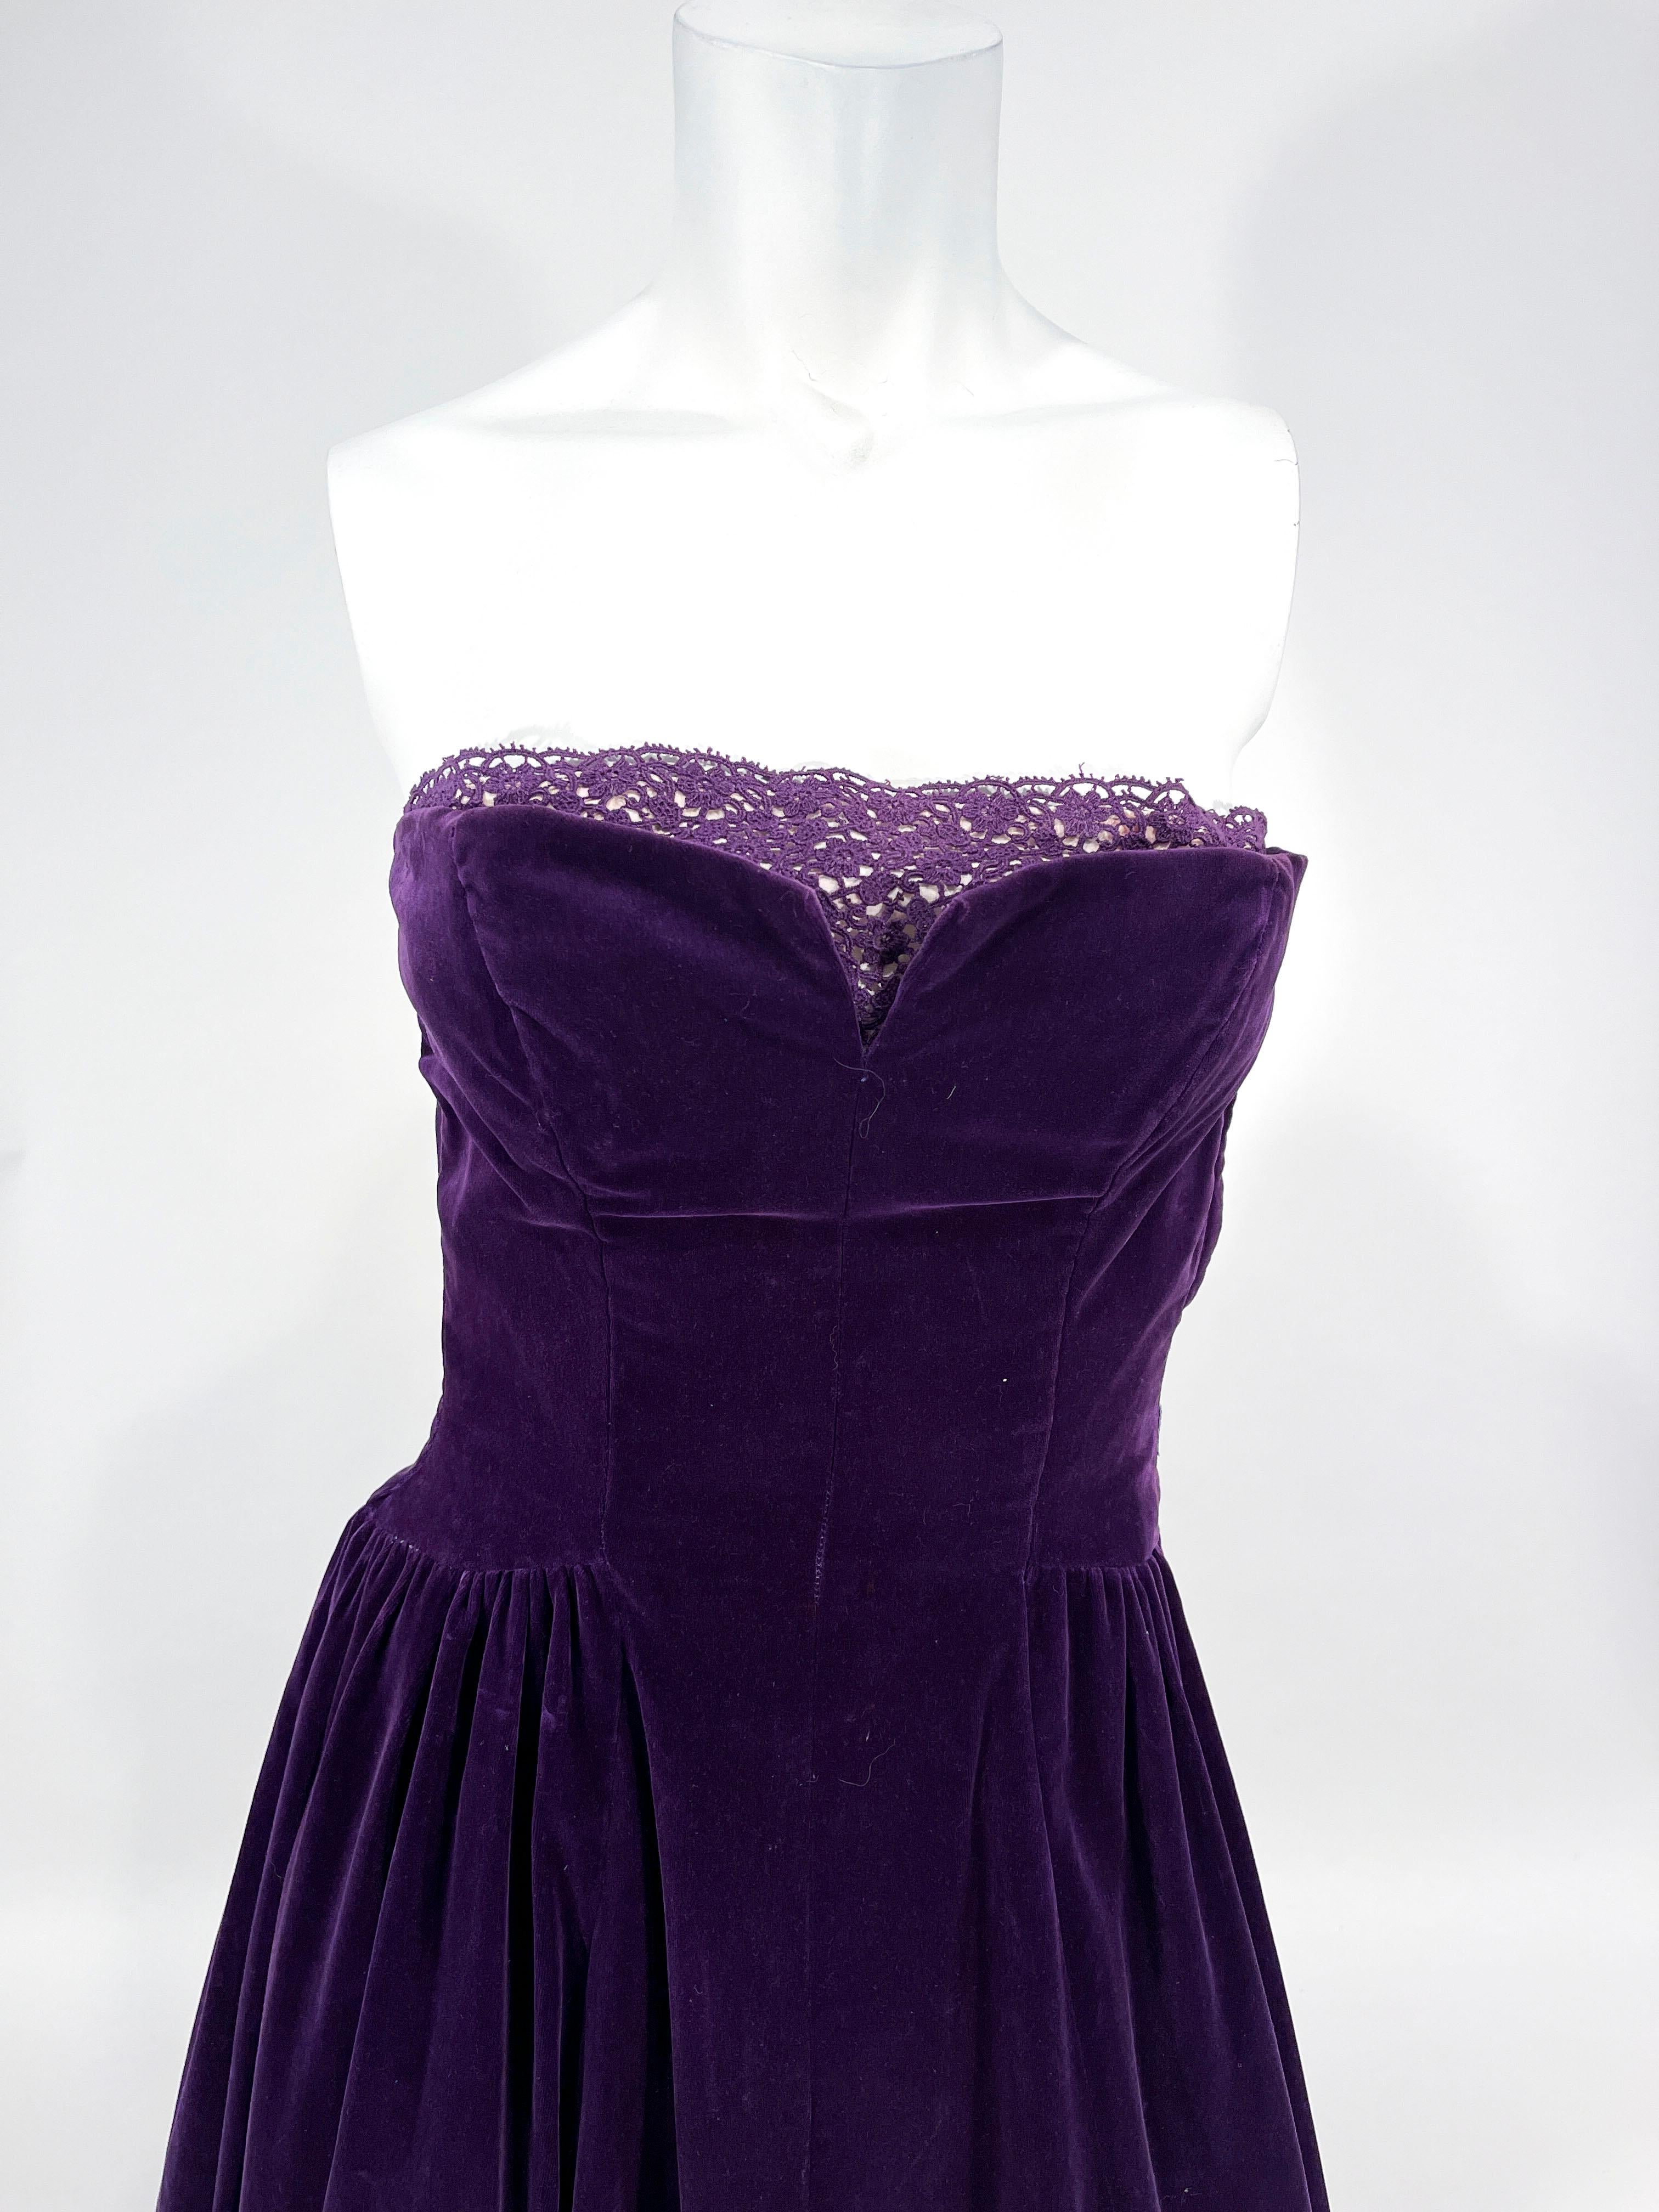 1950s Deep purple velvet strapless party dress. The top of the bodice is adorned with illusion purple lace modestly panel to complement the sharp v-neckline. The full skirt is ankle length and interior of the bodice is boned to provide shape.

This